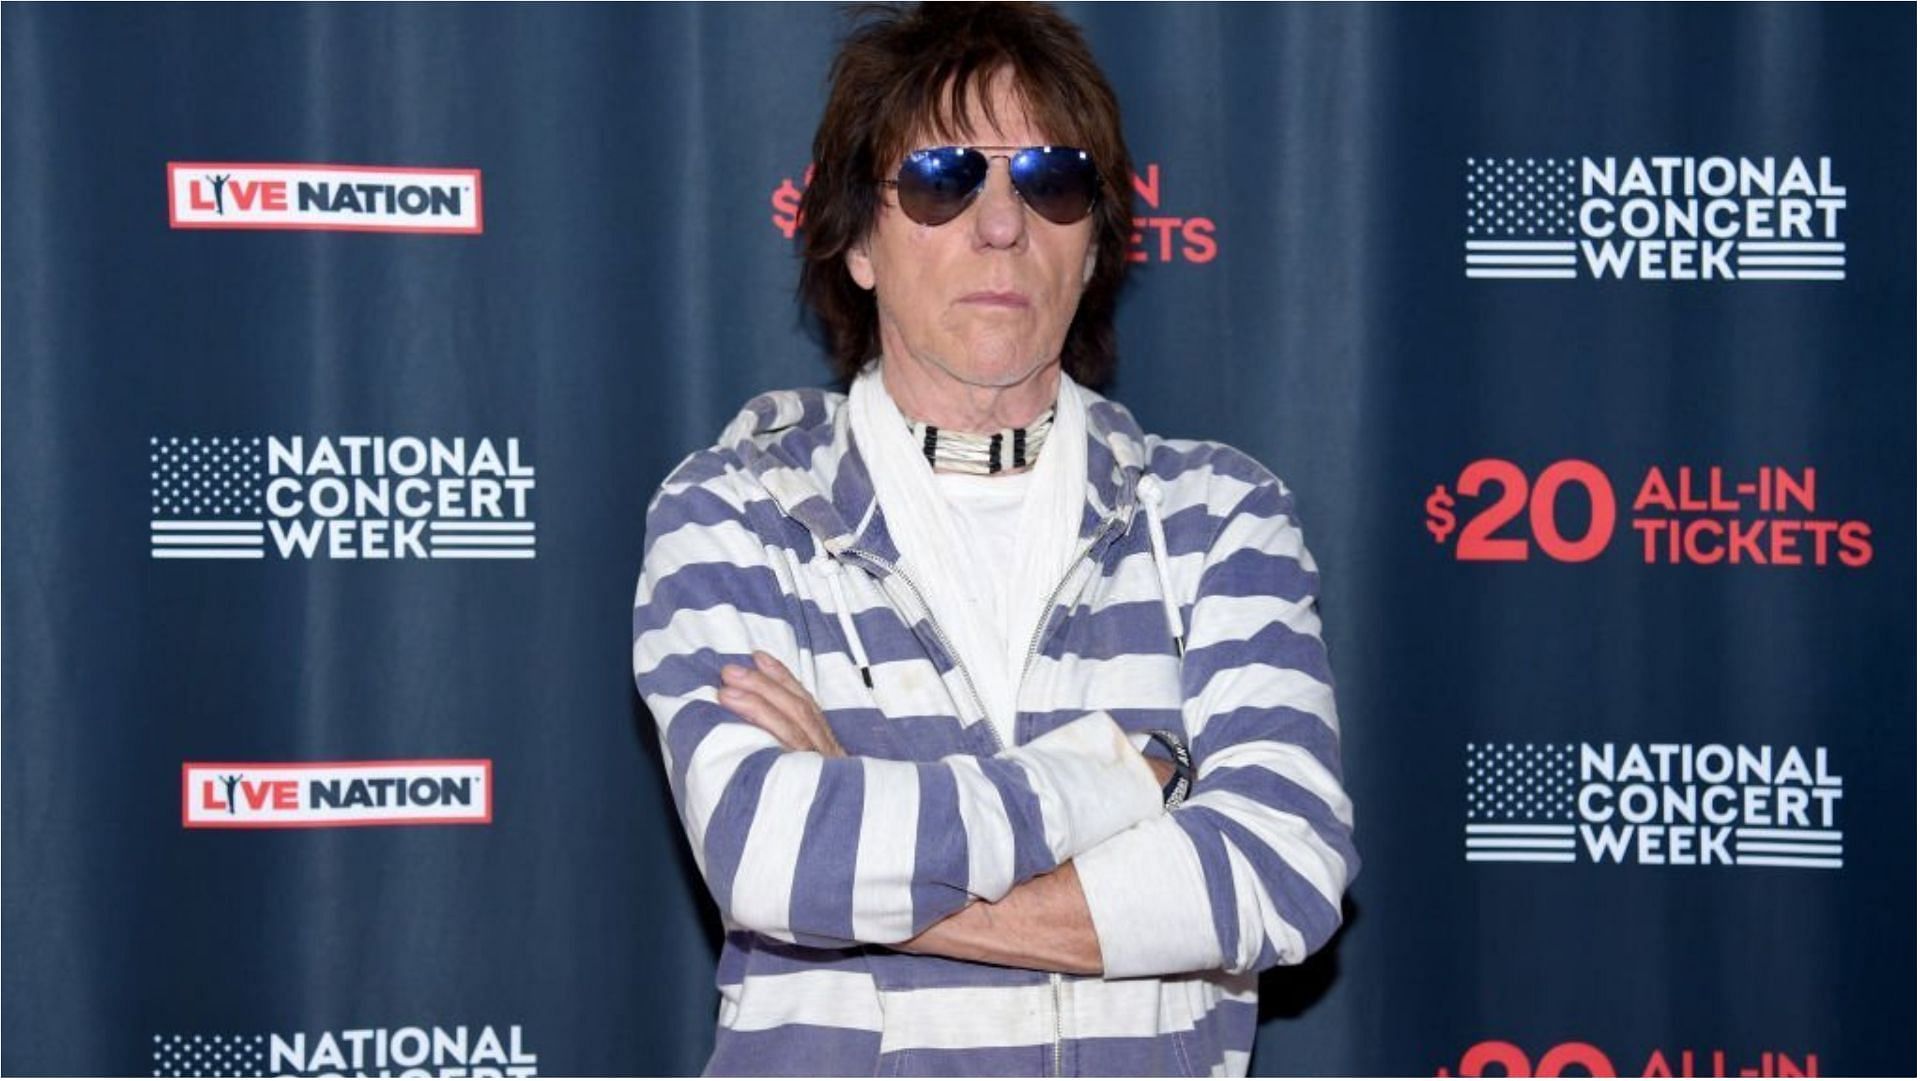 Jeff Beck has earned a lot from his work as a guitarist with different groups over the years (Image via Michael Loccisano/Getty Images)